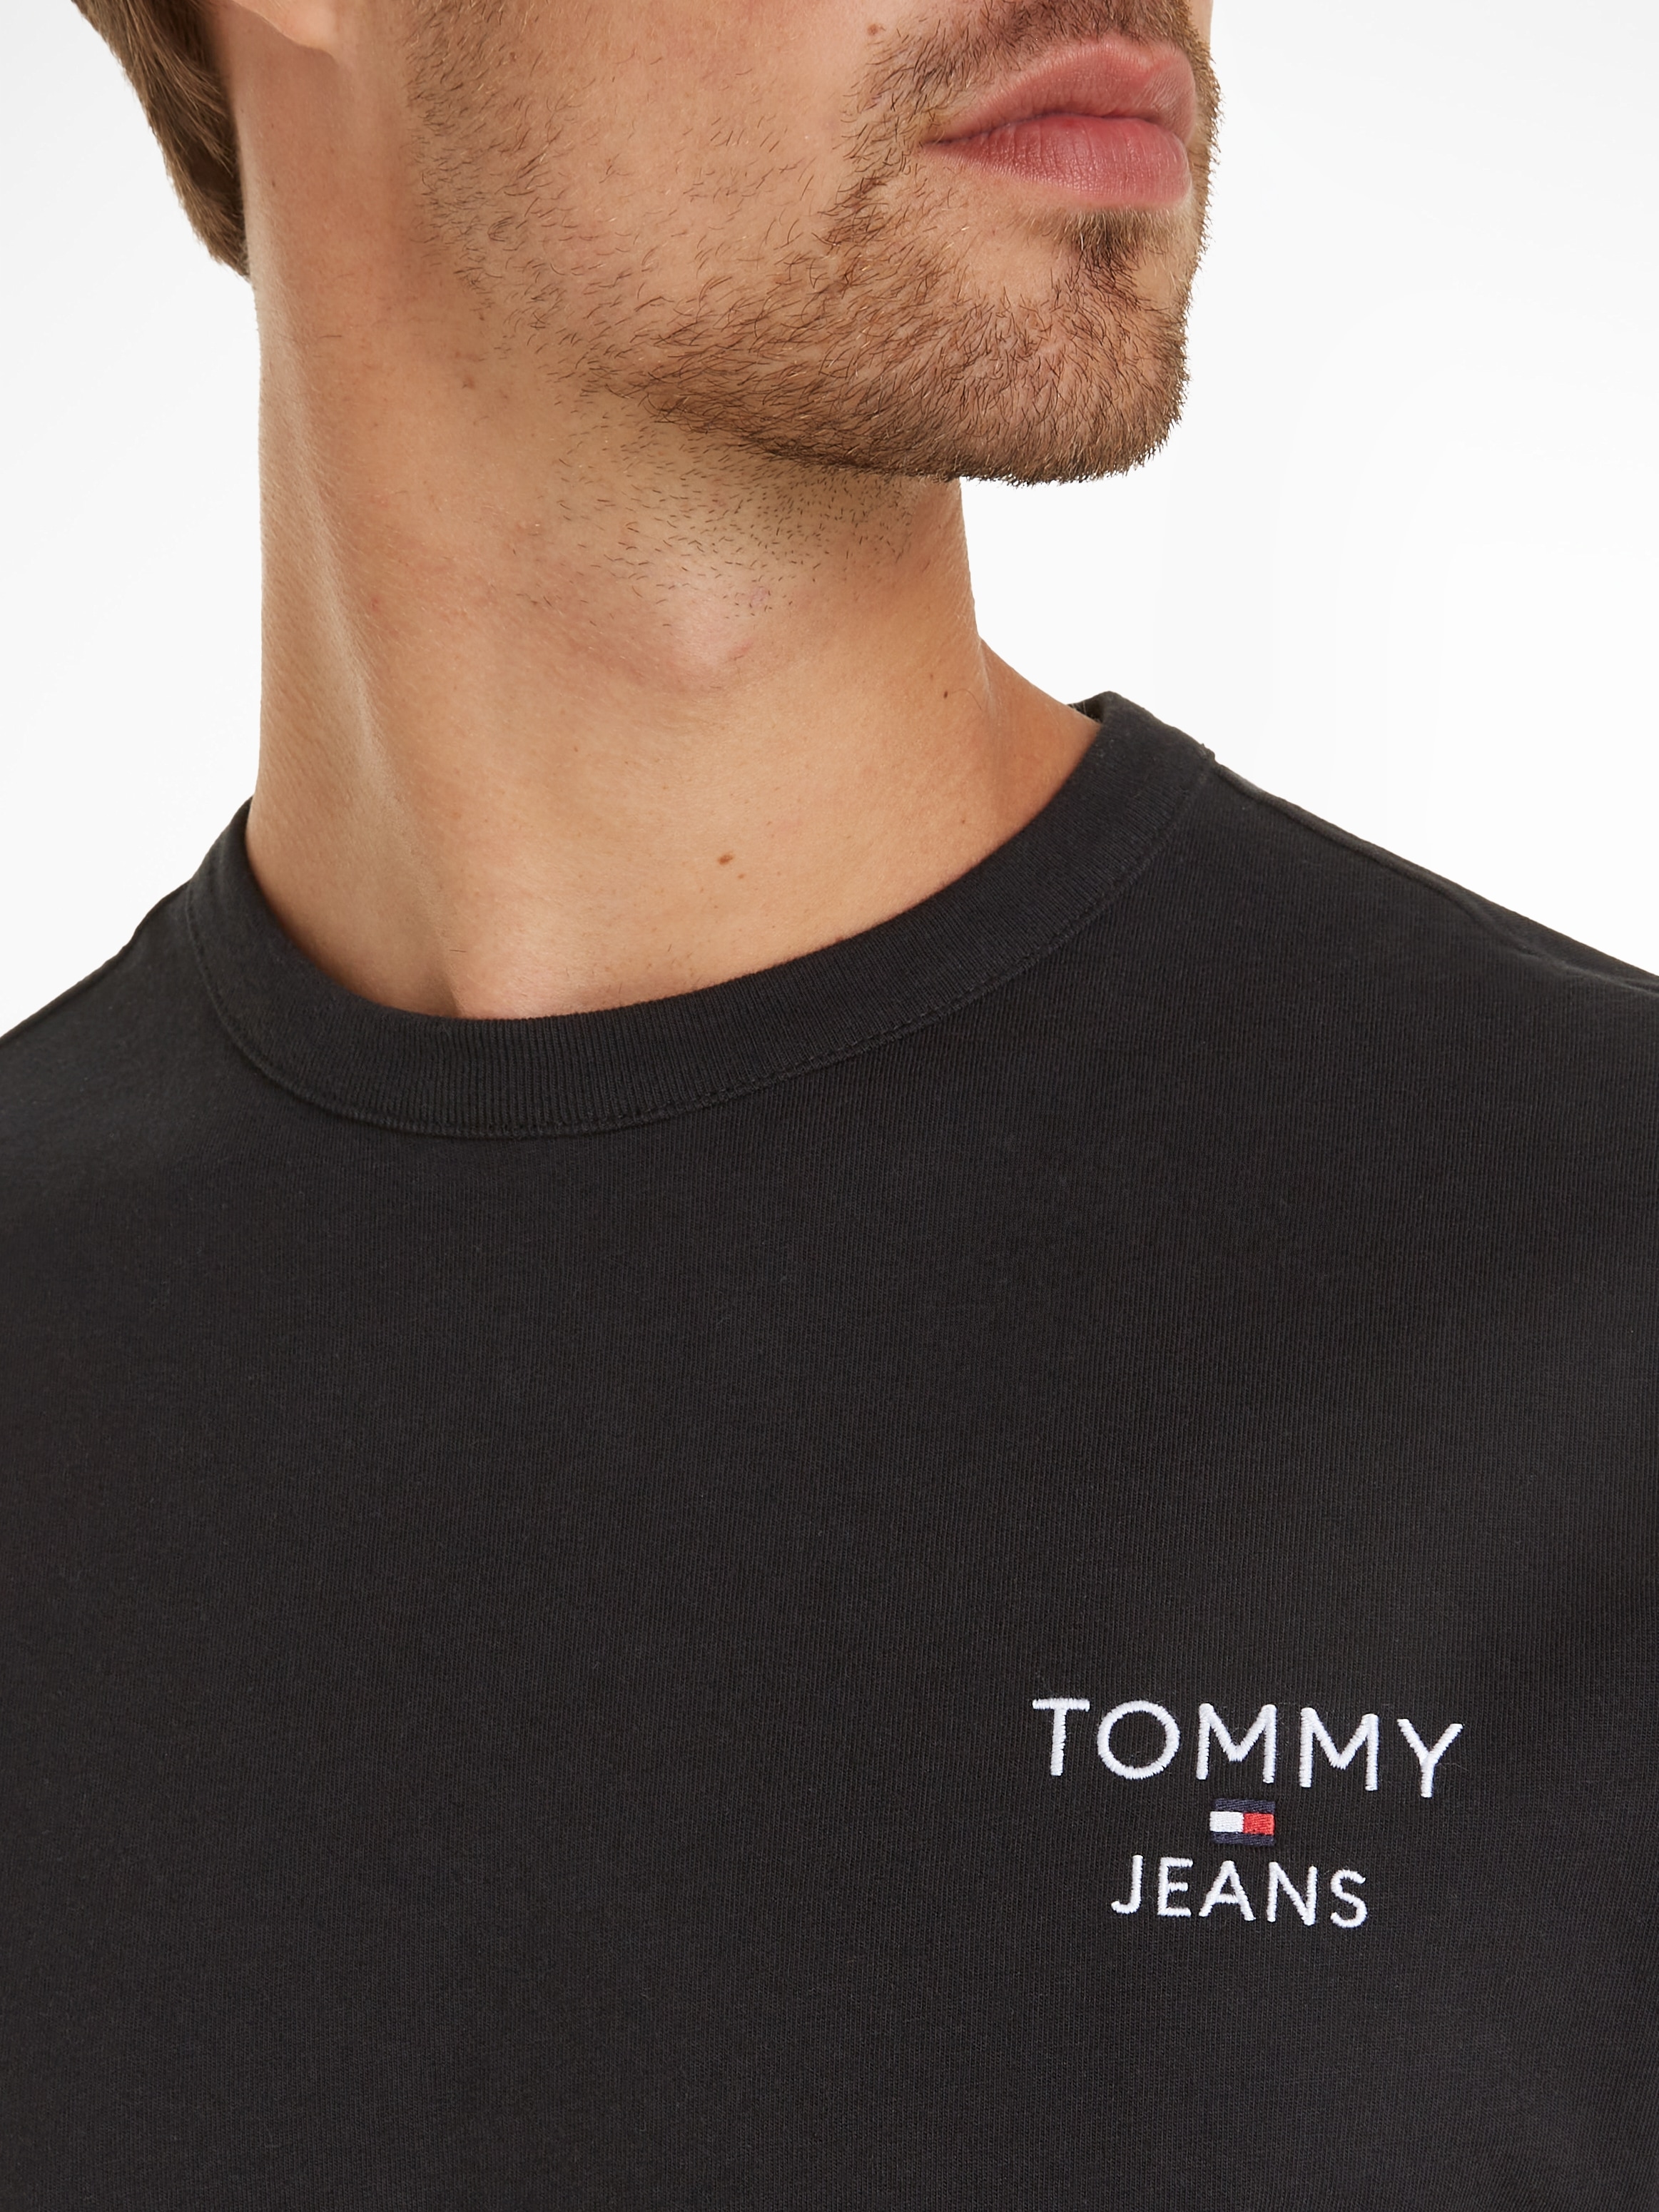 Jeans Stickerei CORP EXT«, Tommy REG bei TEE online T-Shirt mit Jeans »TJM Tommy